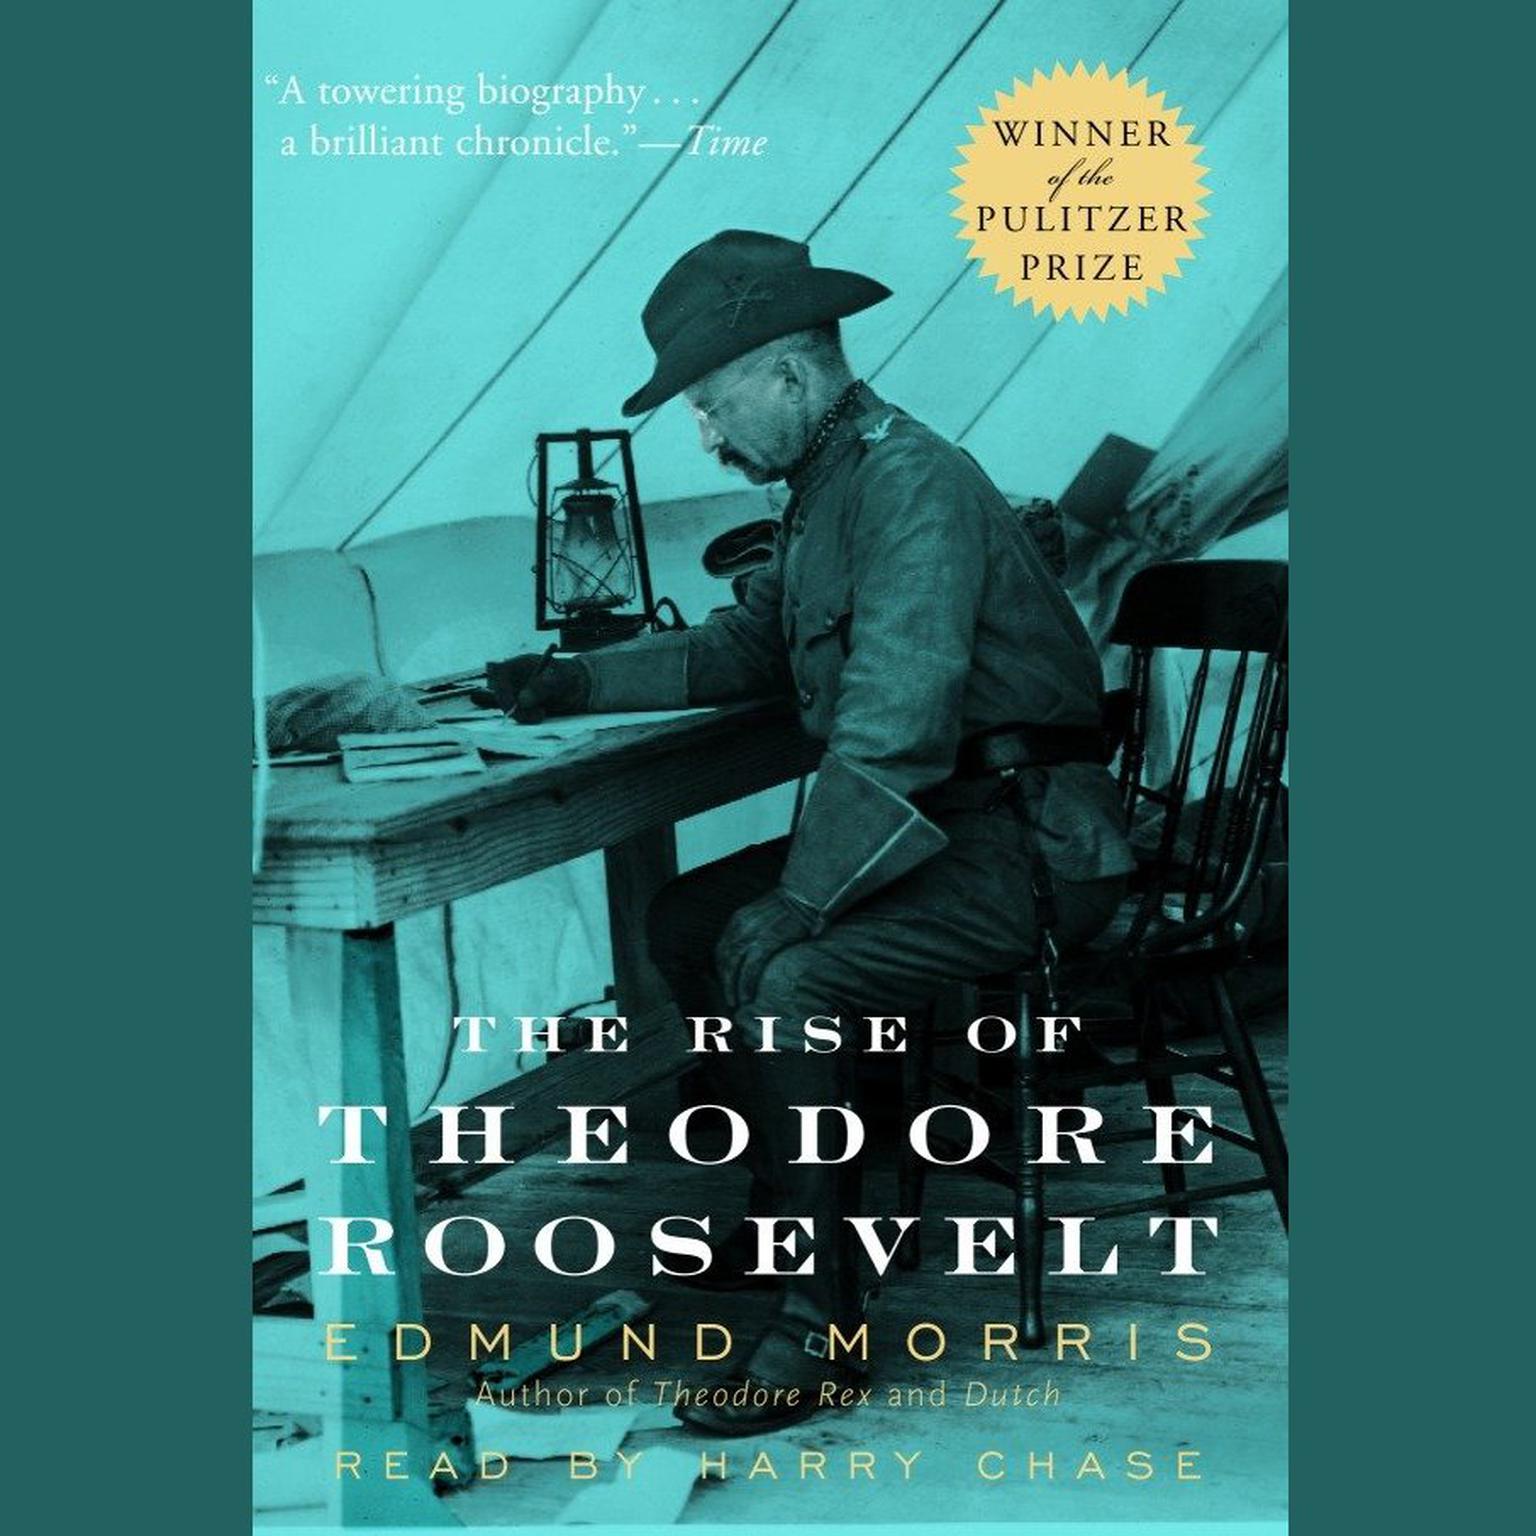 The Rise of Theodore Roosevelt (Abridged) Audiobook, by Edmund Morris